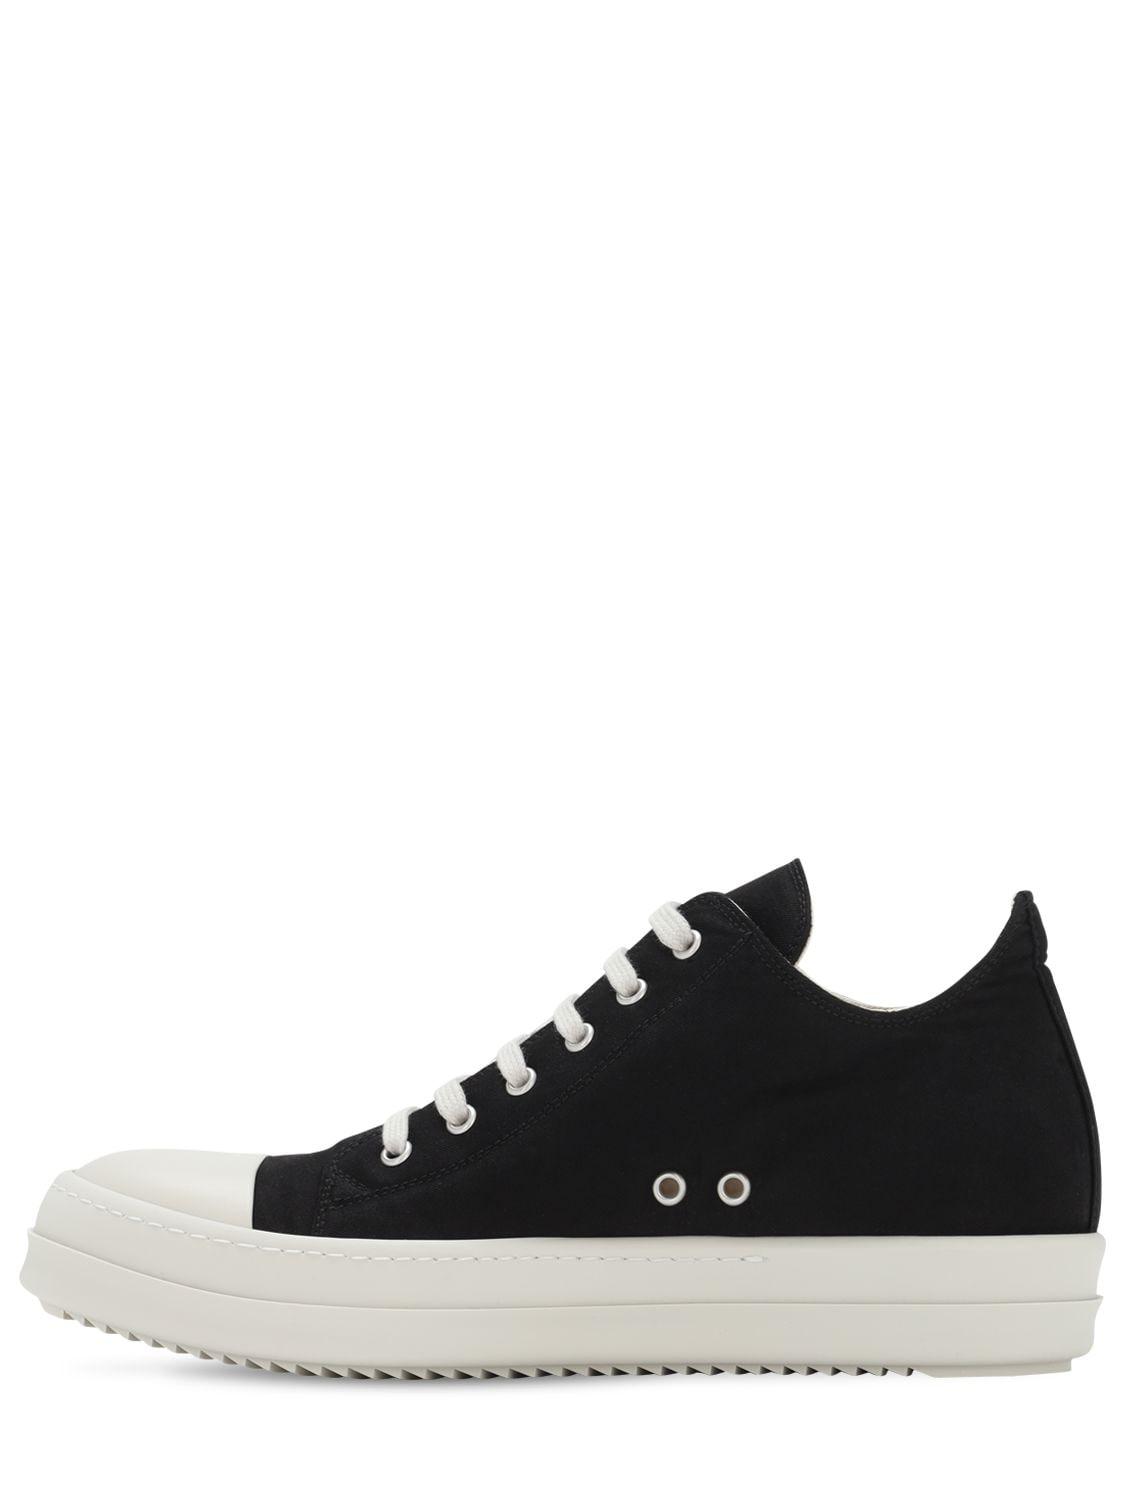 Rick Owens Drkshdw Cotton Twill Low-top Sneakers in Black/White (Black ...